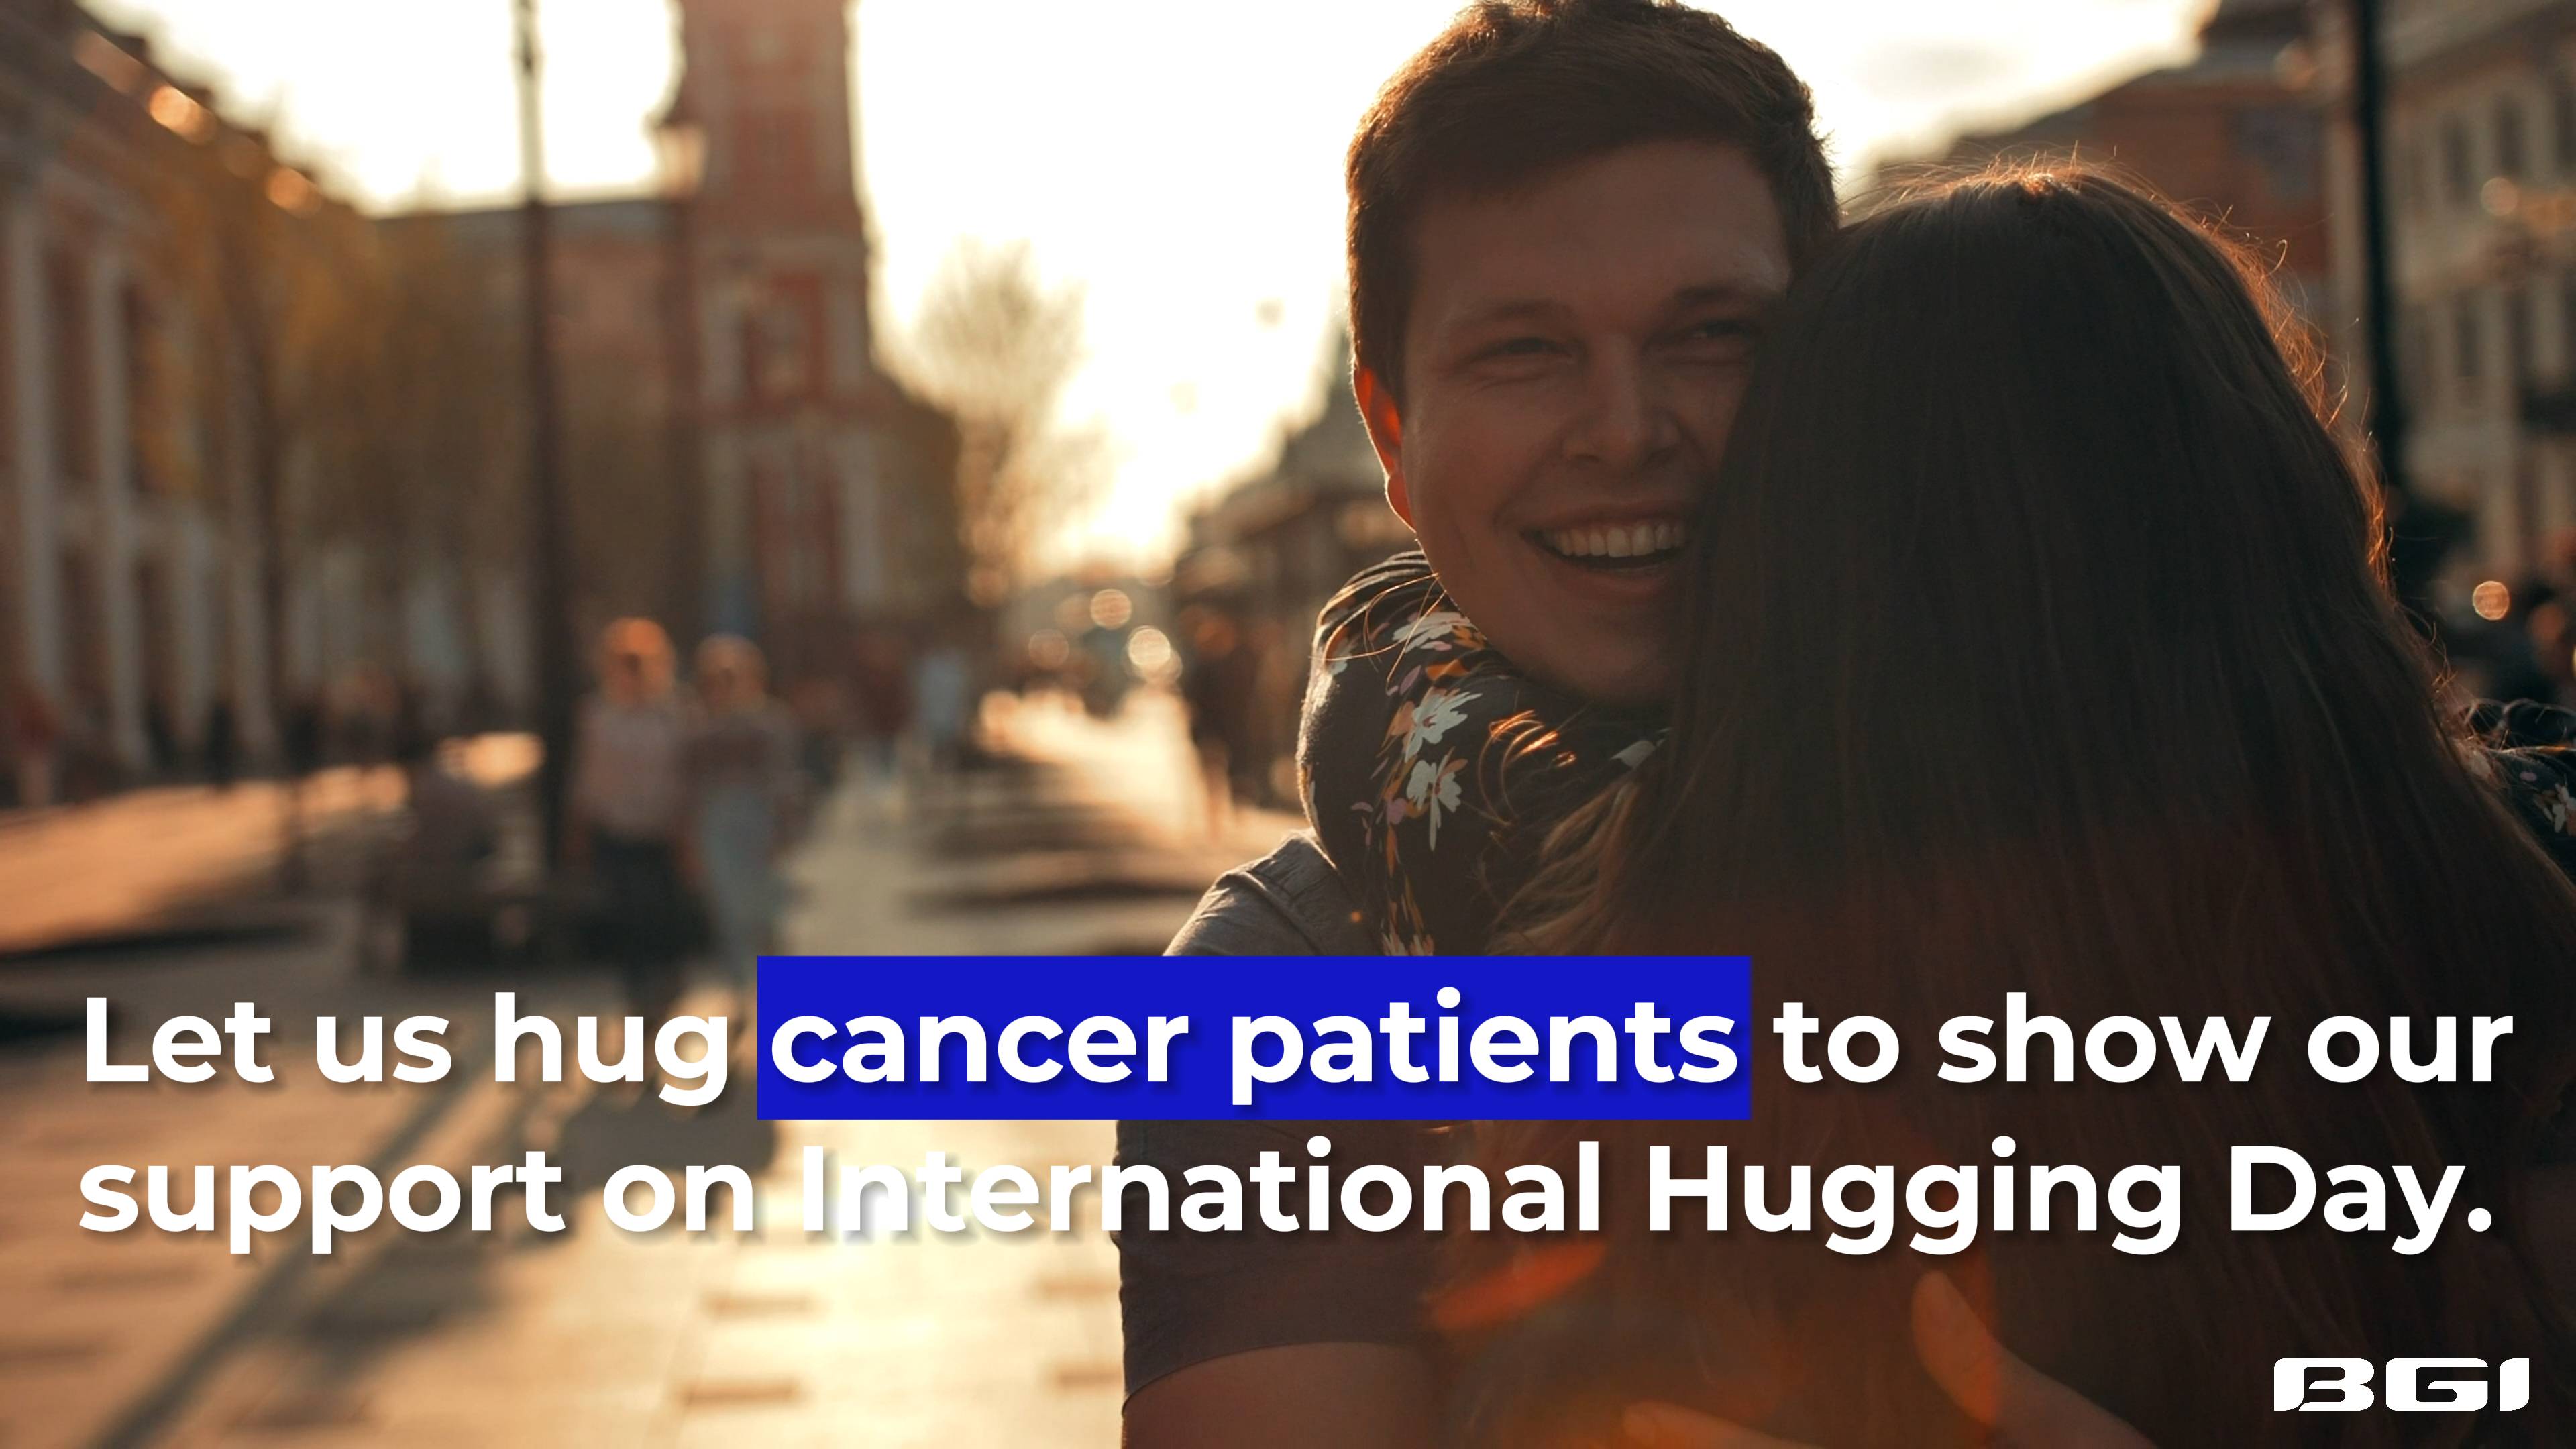 #DKY Hugs Can Provide Strength To Those Battling Cancer?